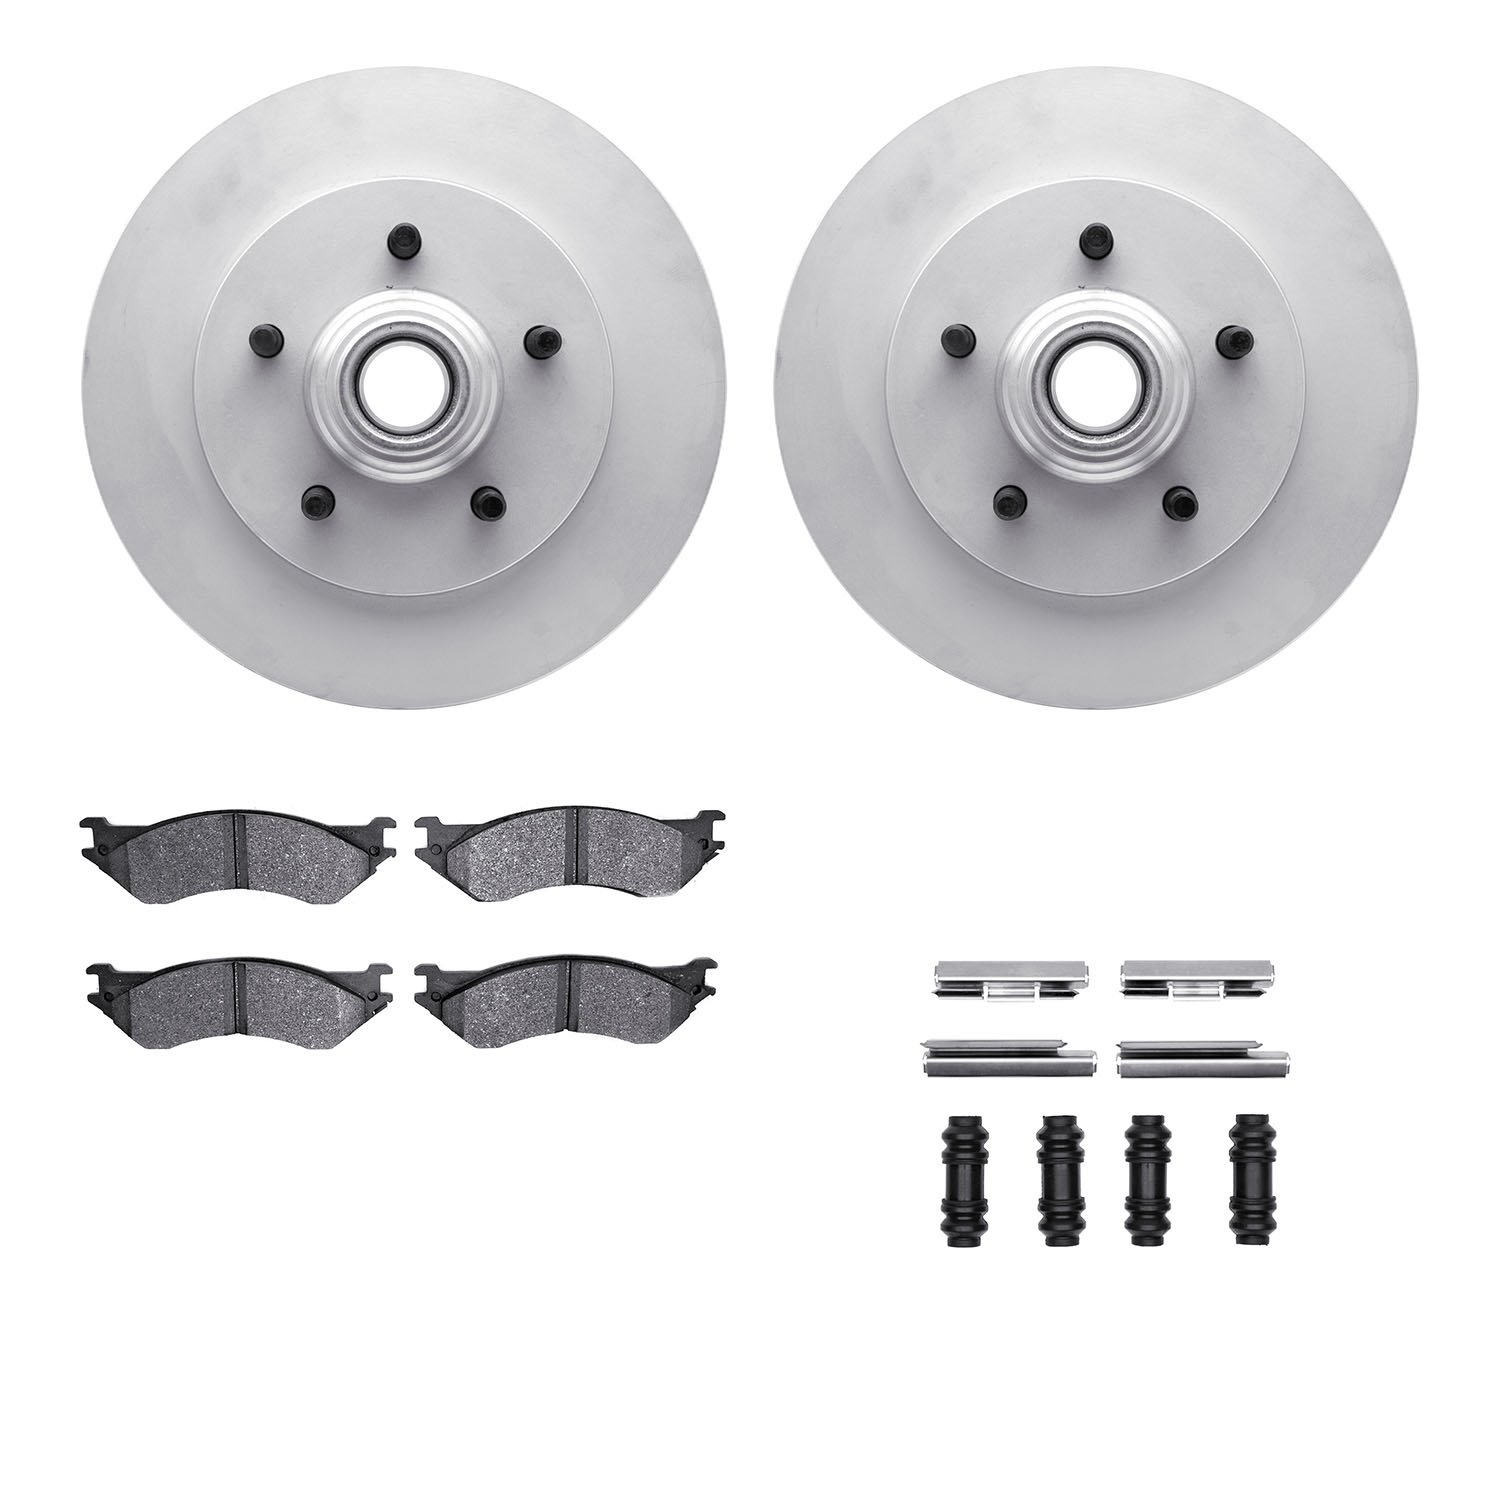 4412-54032 Geospec Brake Rotors with Ultimate-Duty Brake Pads & Hardware, 1999-2004 Ford/Lincoln/Mercury/Mazda, Position: Front